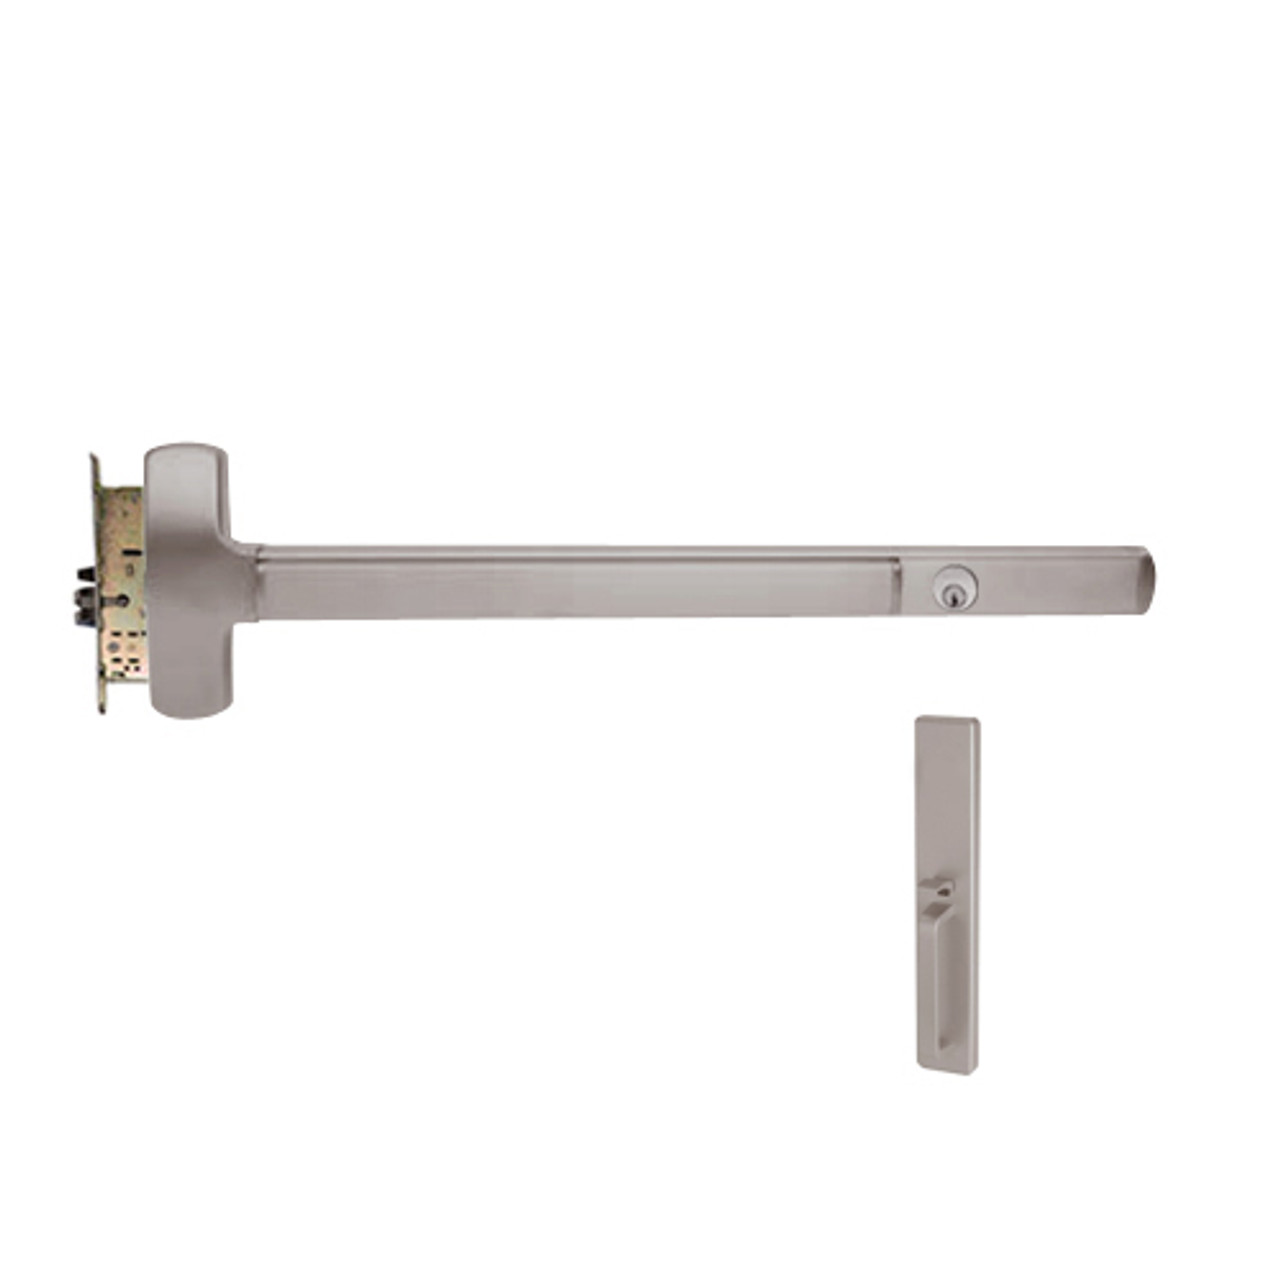 CD25-M-TP-BE-US28-3-RHR Falcon Exit Device in Anodized Aluminum